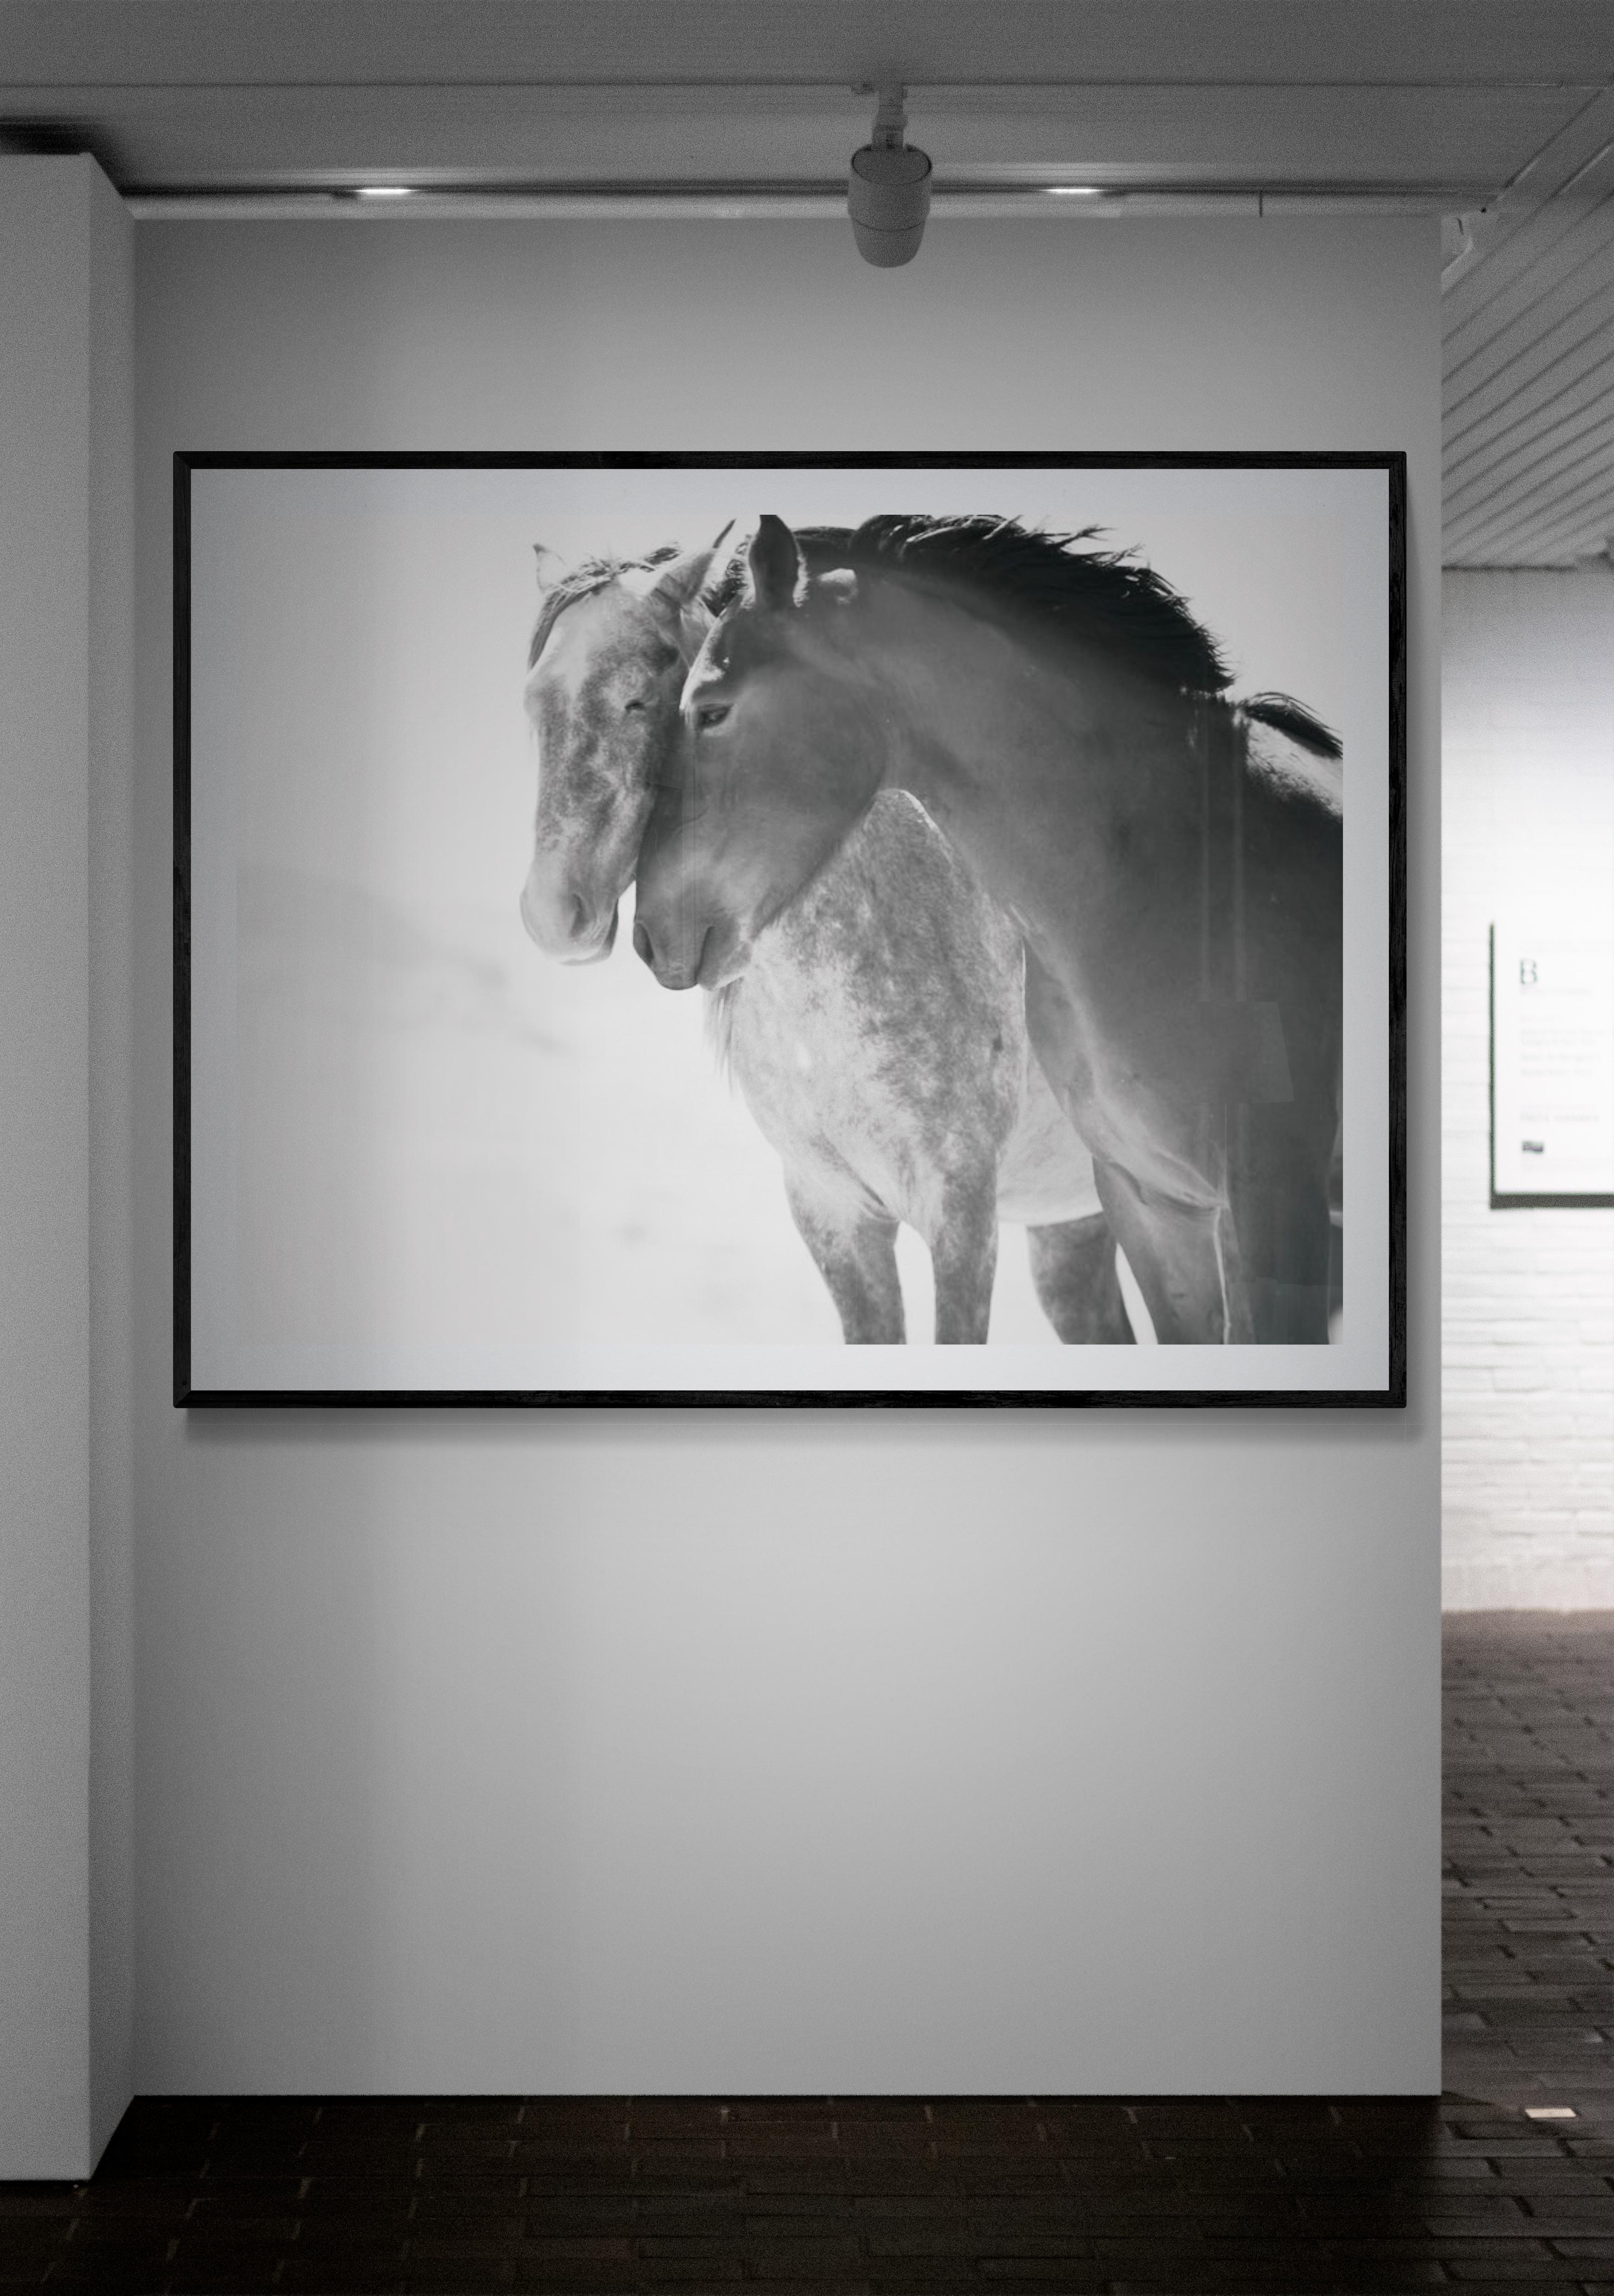  Soulmates 36x48 Black & White Photography of Wild Horses Mustang Photograph 2